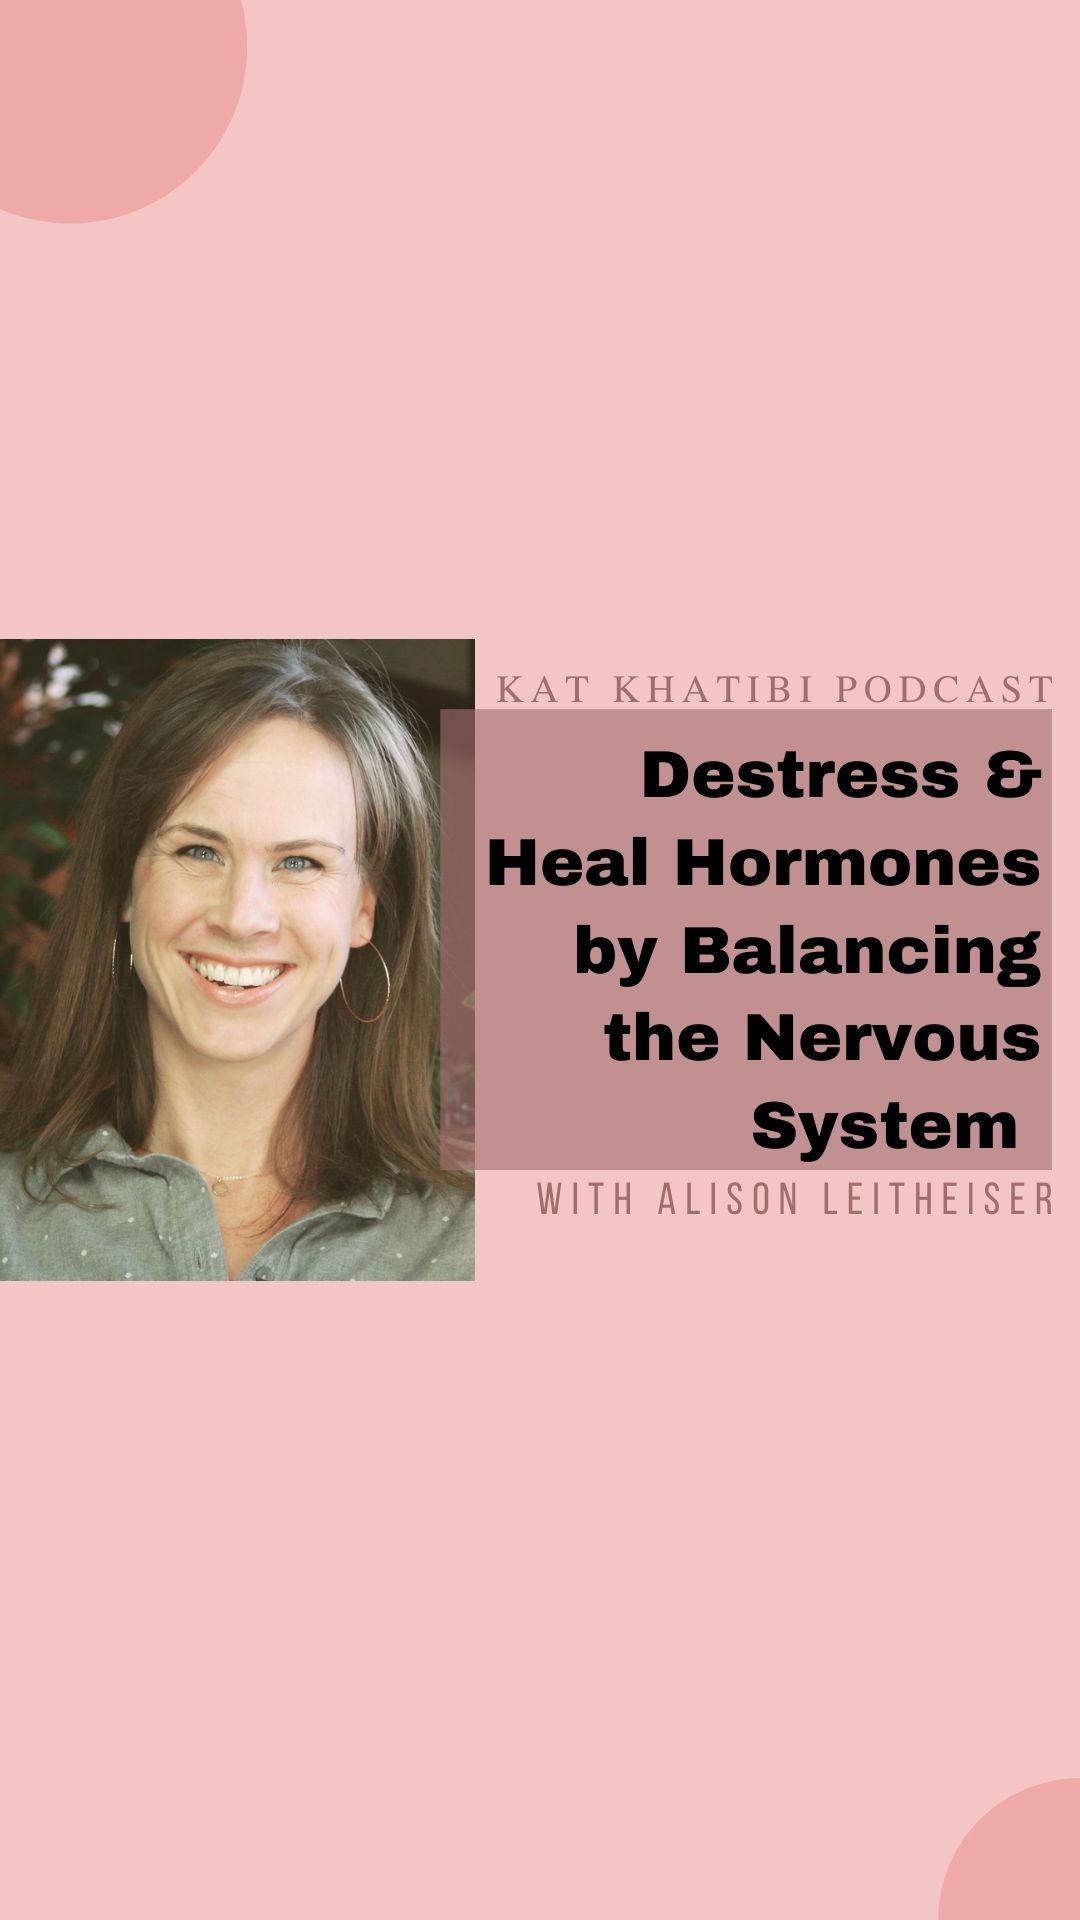 Destress to Heal Hormones by Balancing the Nervous System with Alison Leitheiser